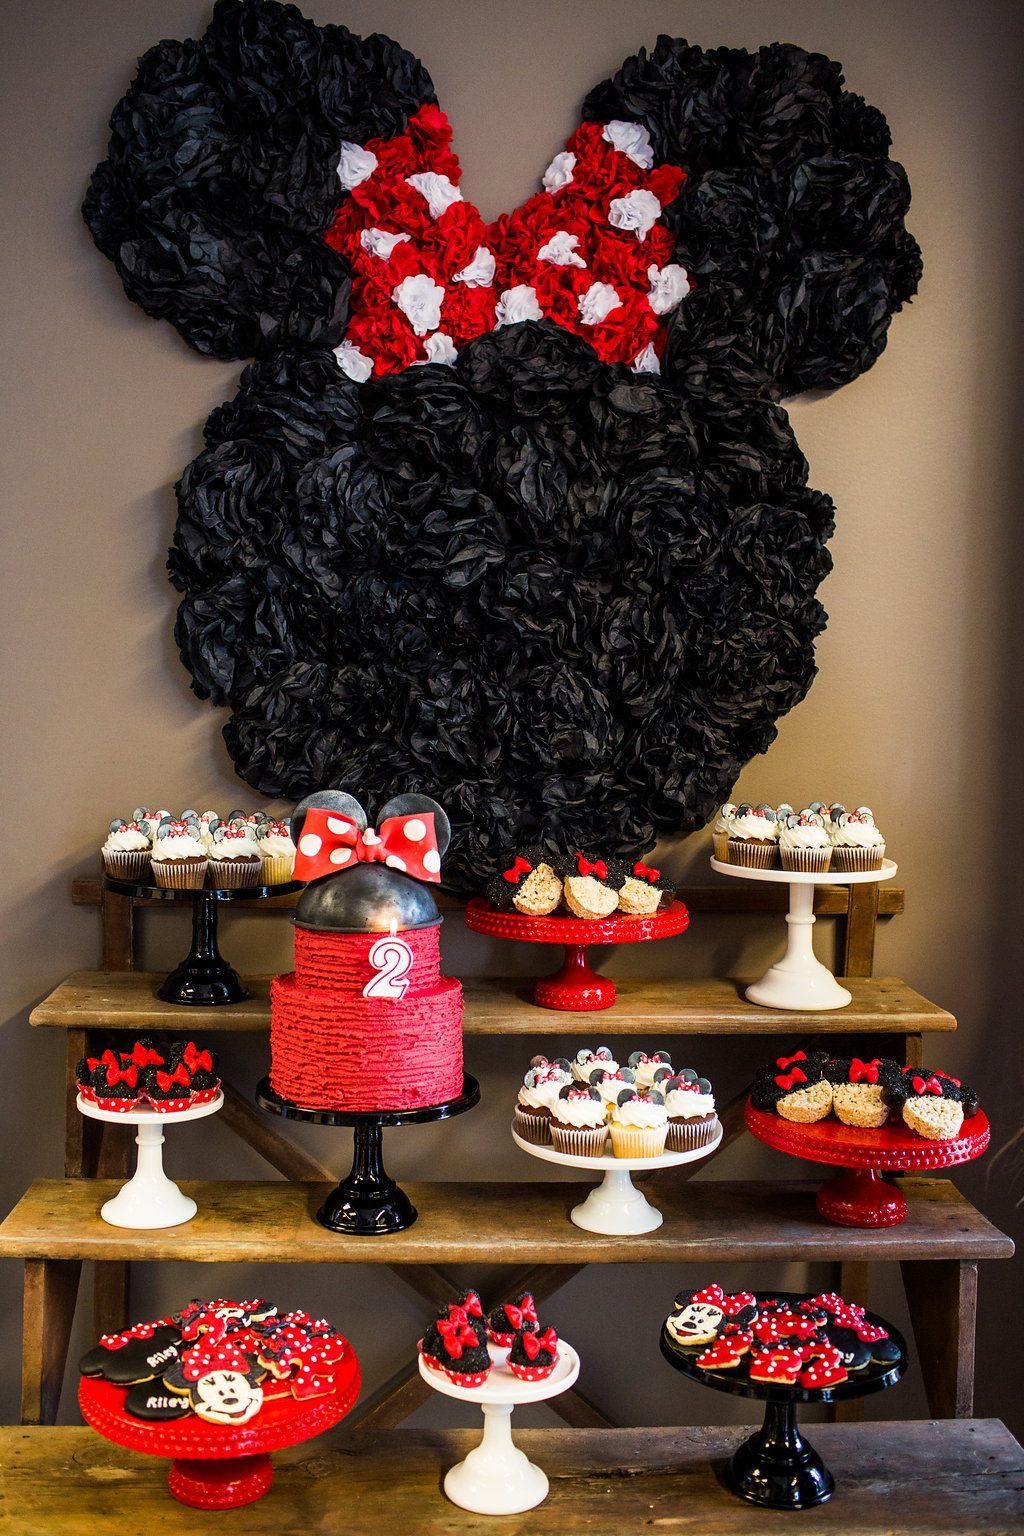 DIY Minnie Mouse Party Decorations
 Top 10 Minnie Mouse Birthday Party Ideas by Lindi Haws of